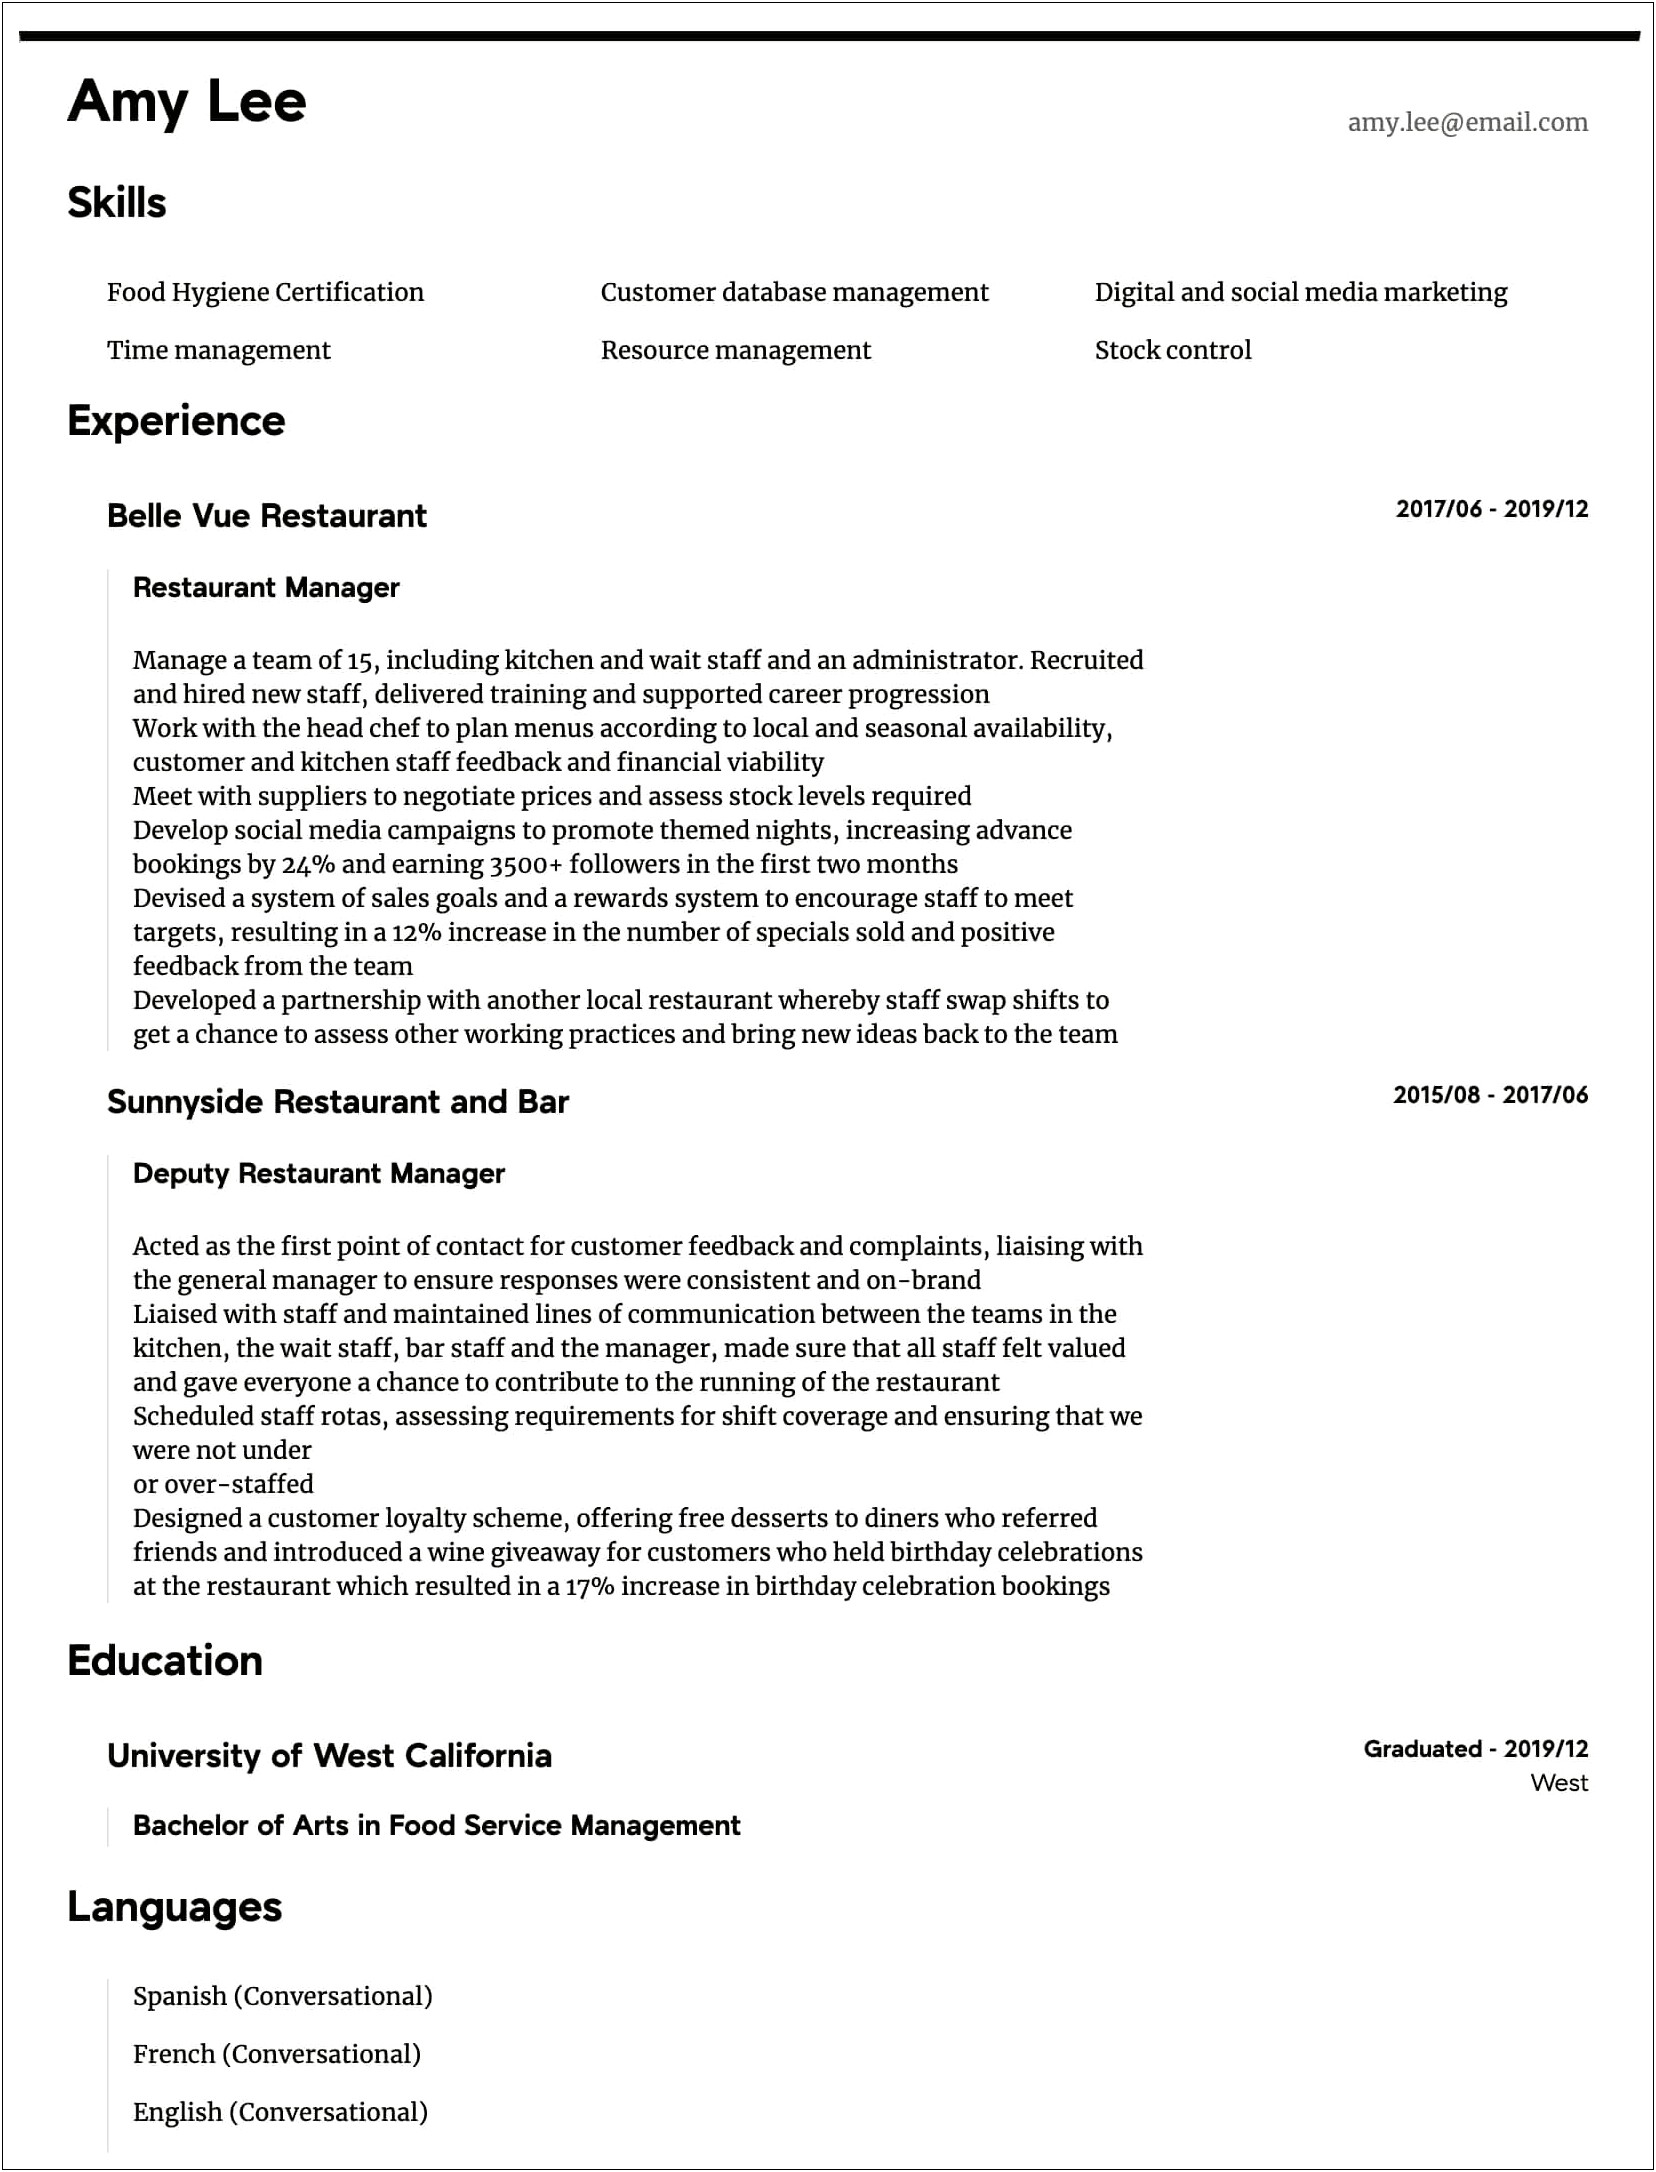 Resume For Restaurant Manager Examples